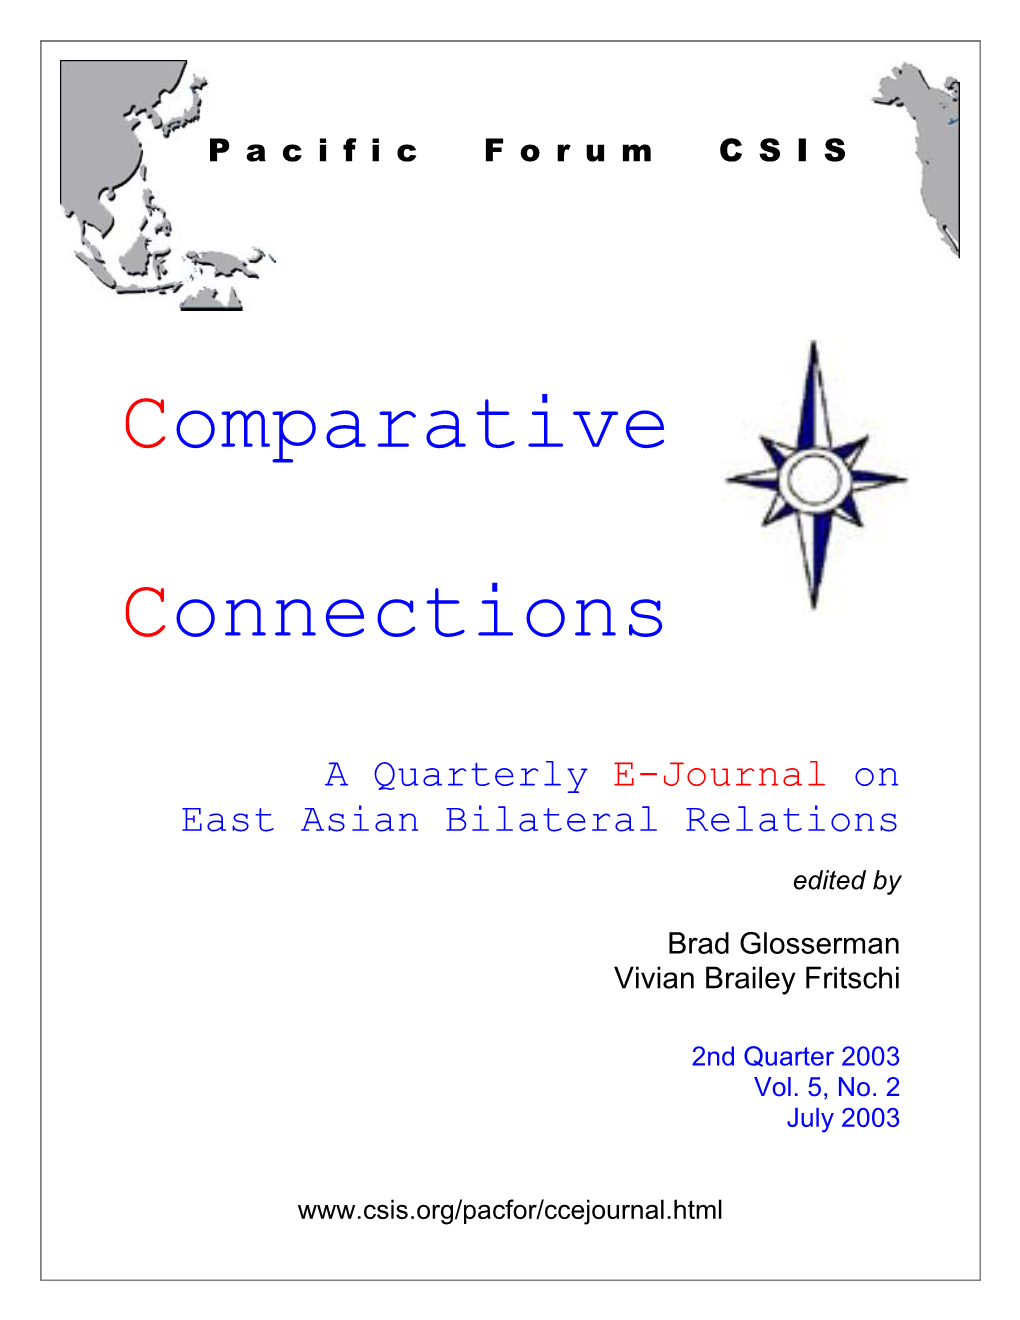 Comparative Connections, Volume 5, Number 2